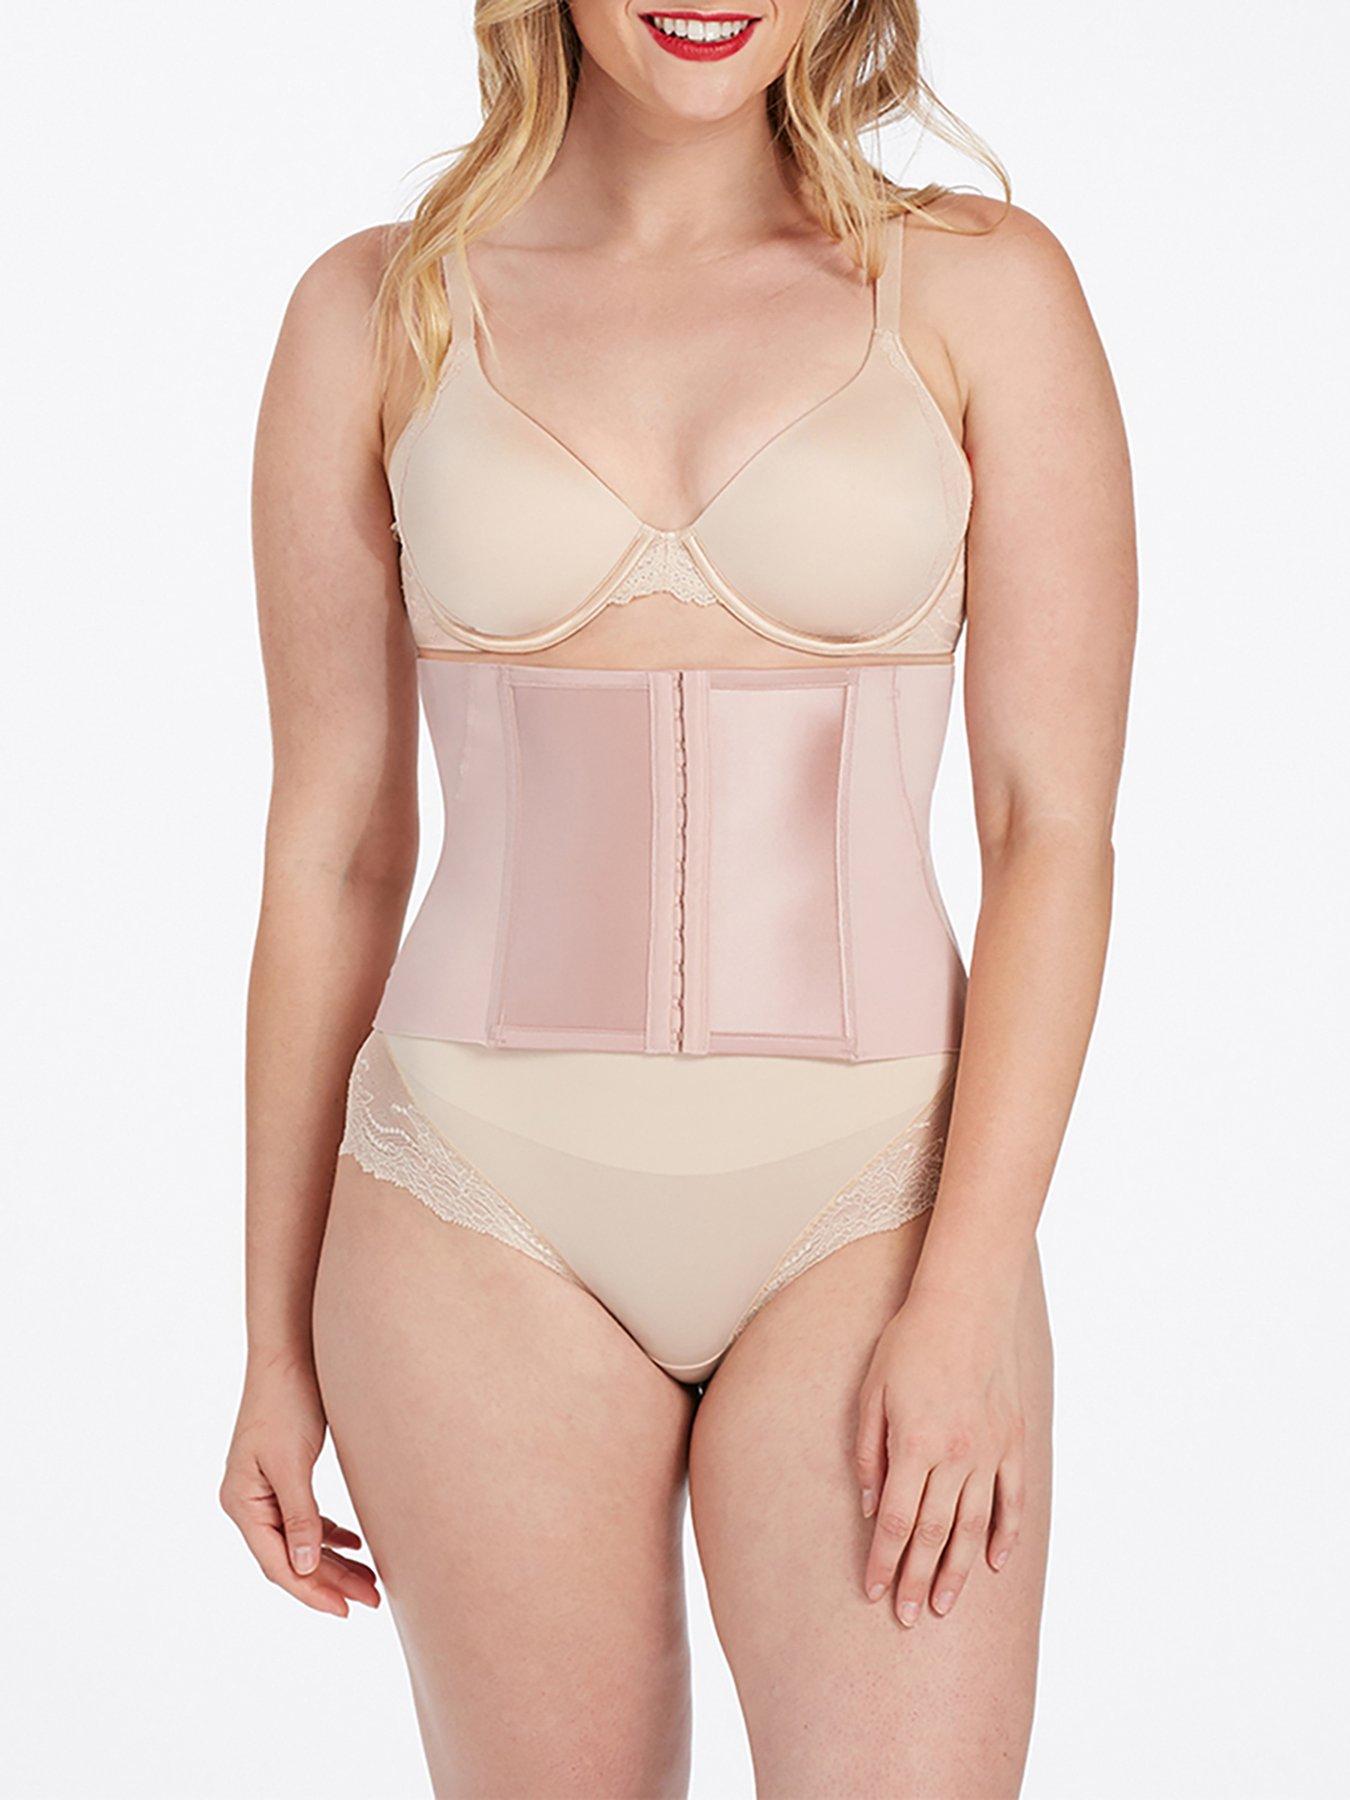 Belly Bandit Mother Tucker® Shaping Corset Nude LG at